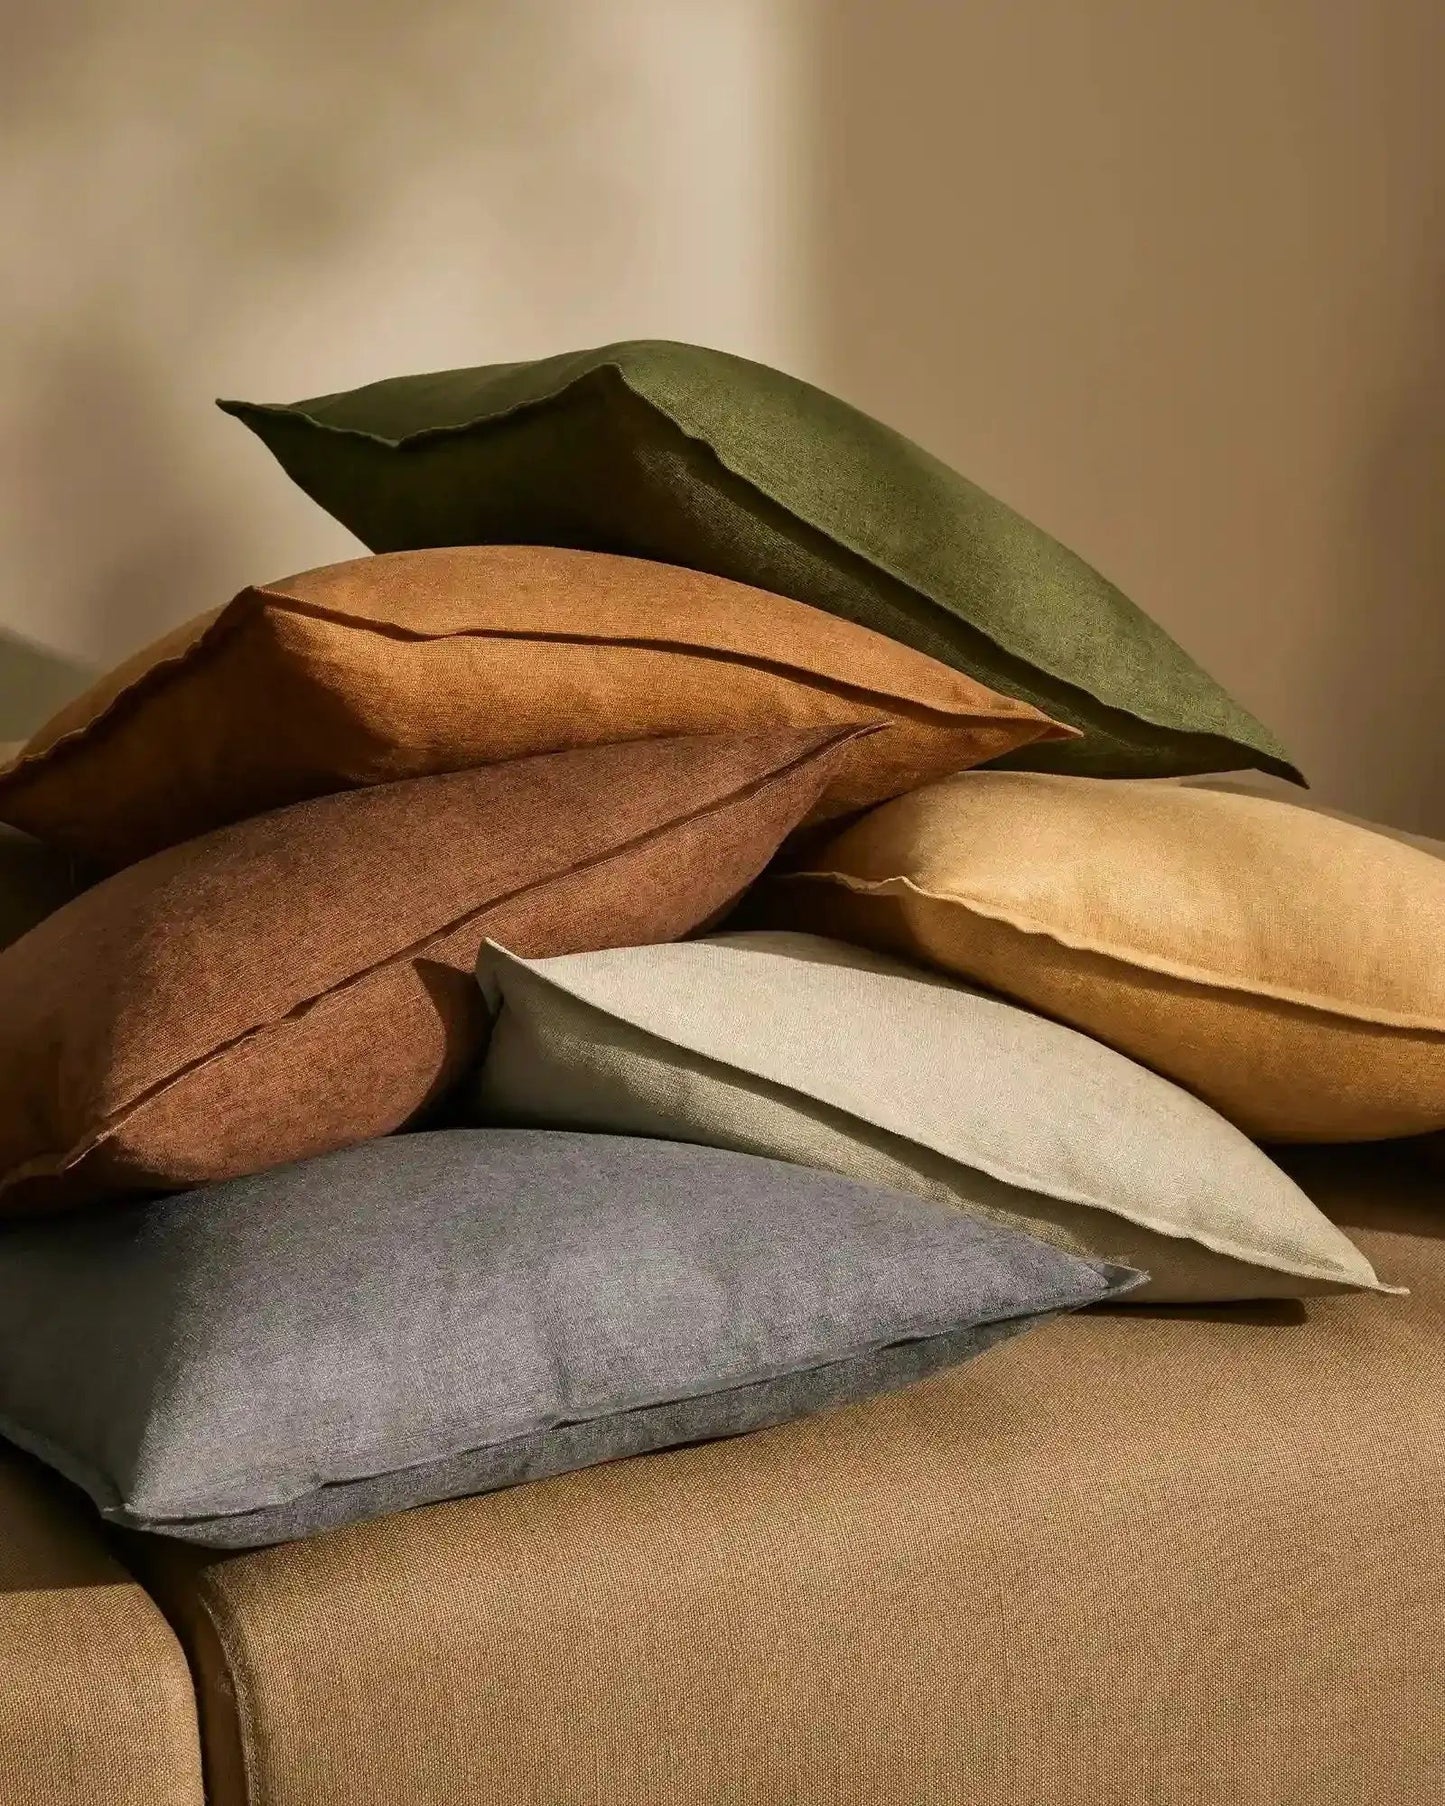 FIORE LINEN BLEND CHENILLE CUSHION 40 X 60CM choose from 9 colours